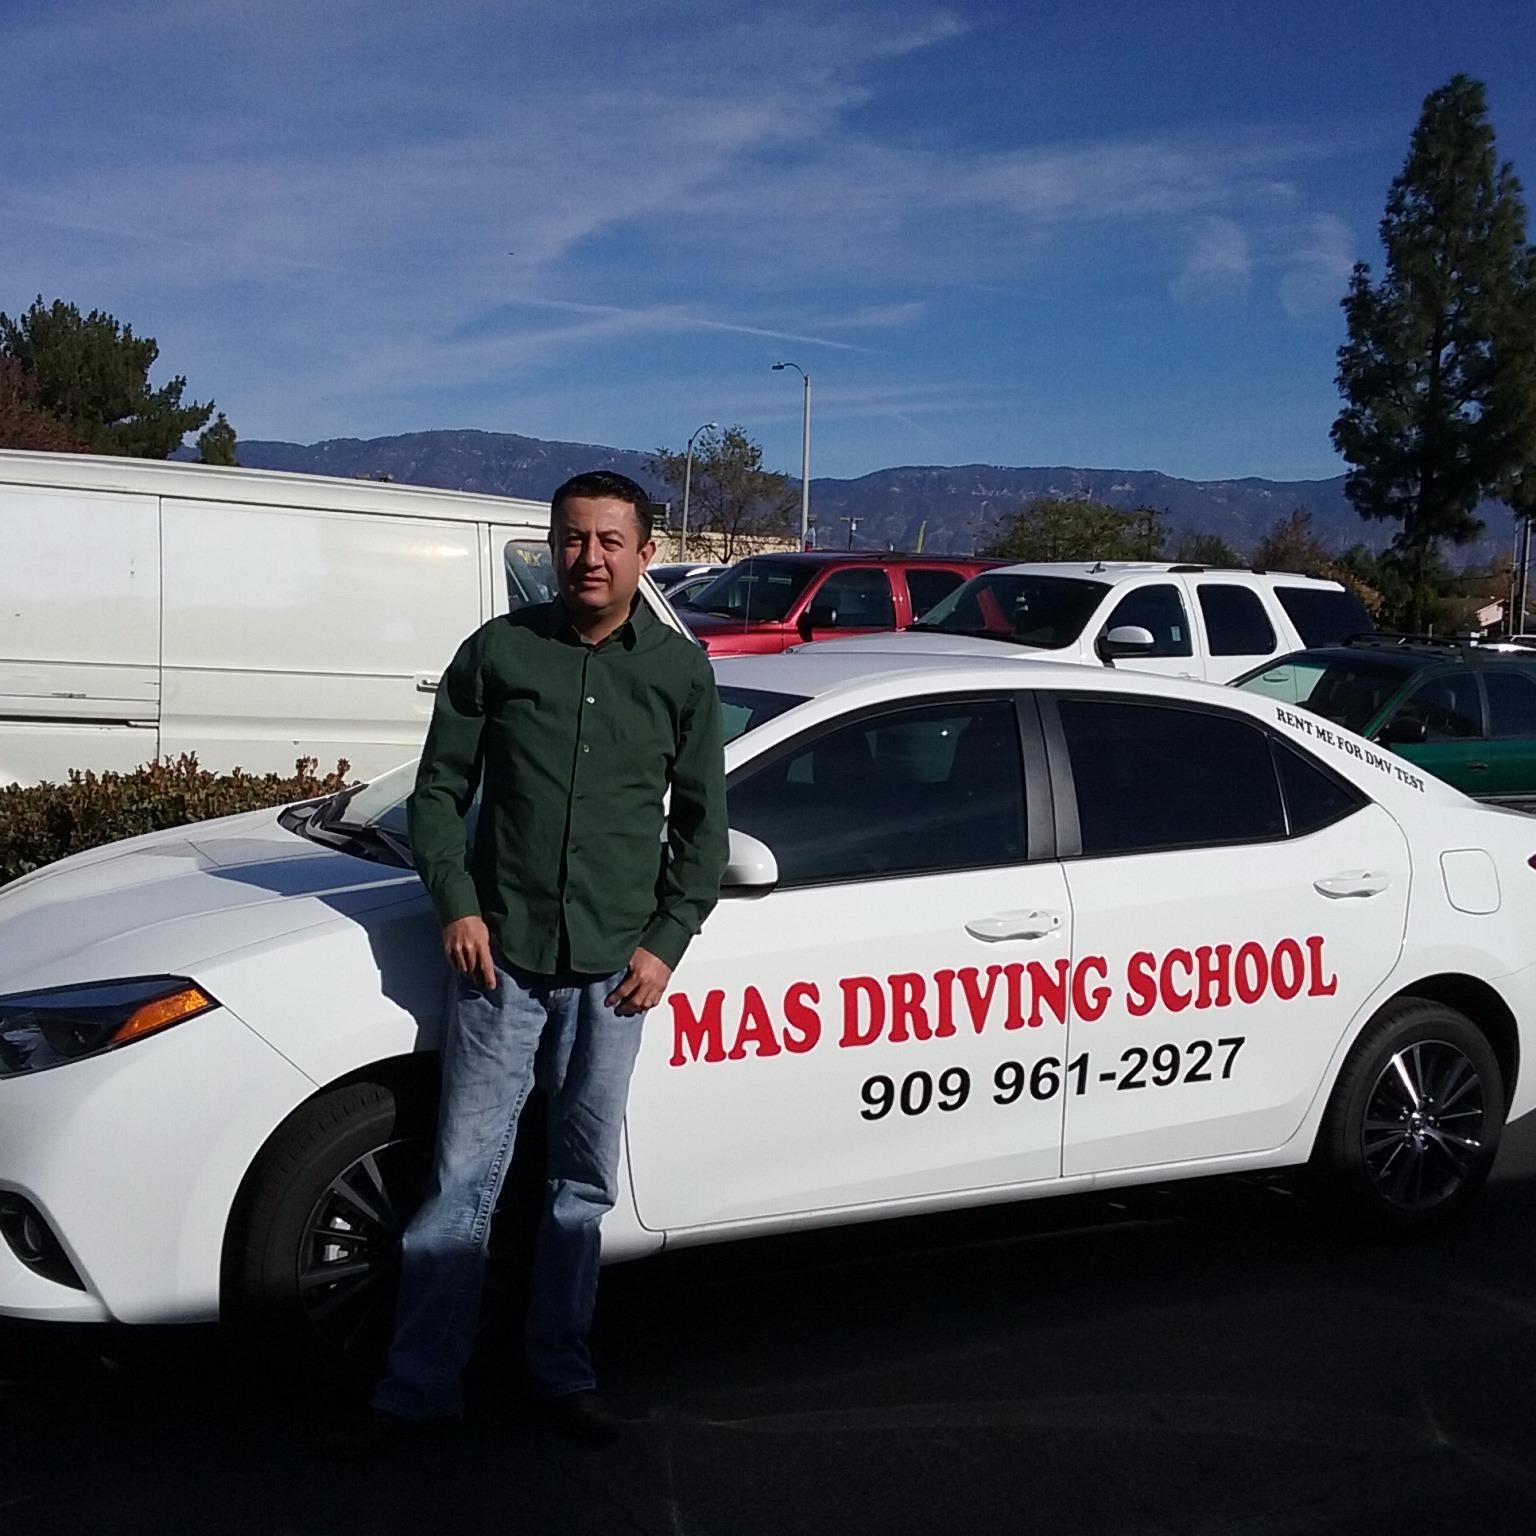 Mas Driving School Coupons near me in Rialto | 8coupons